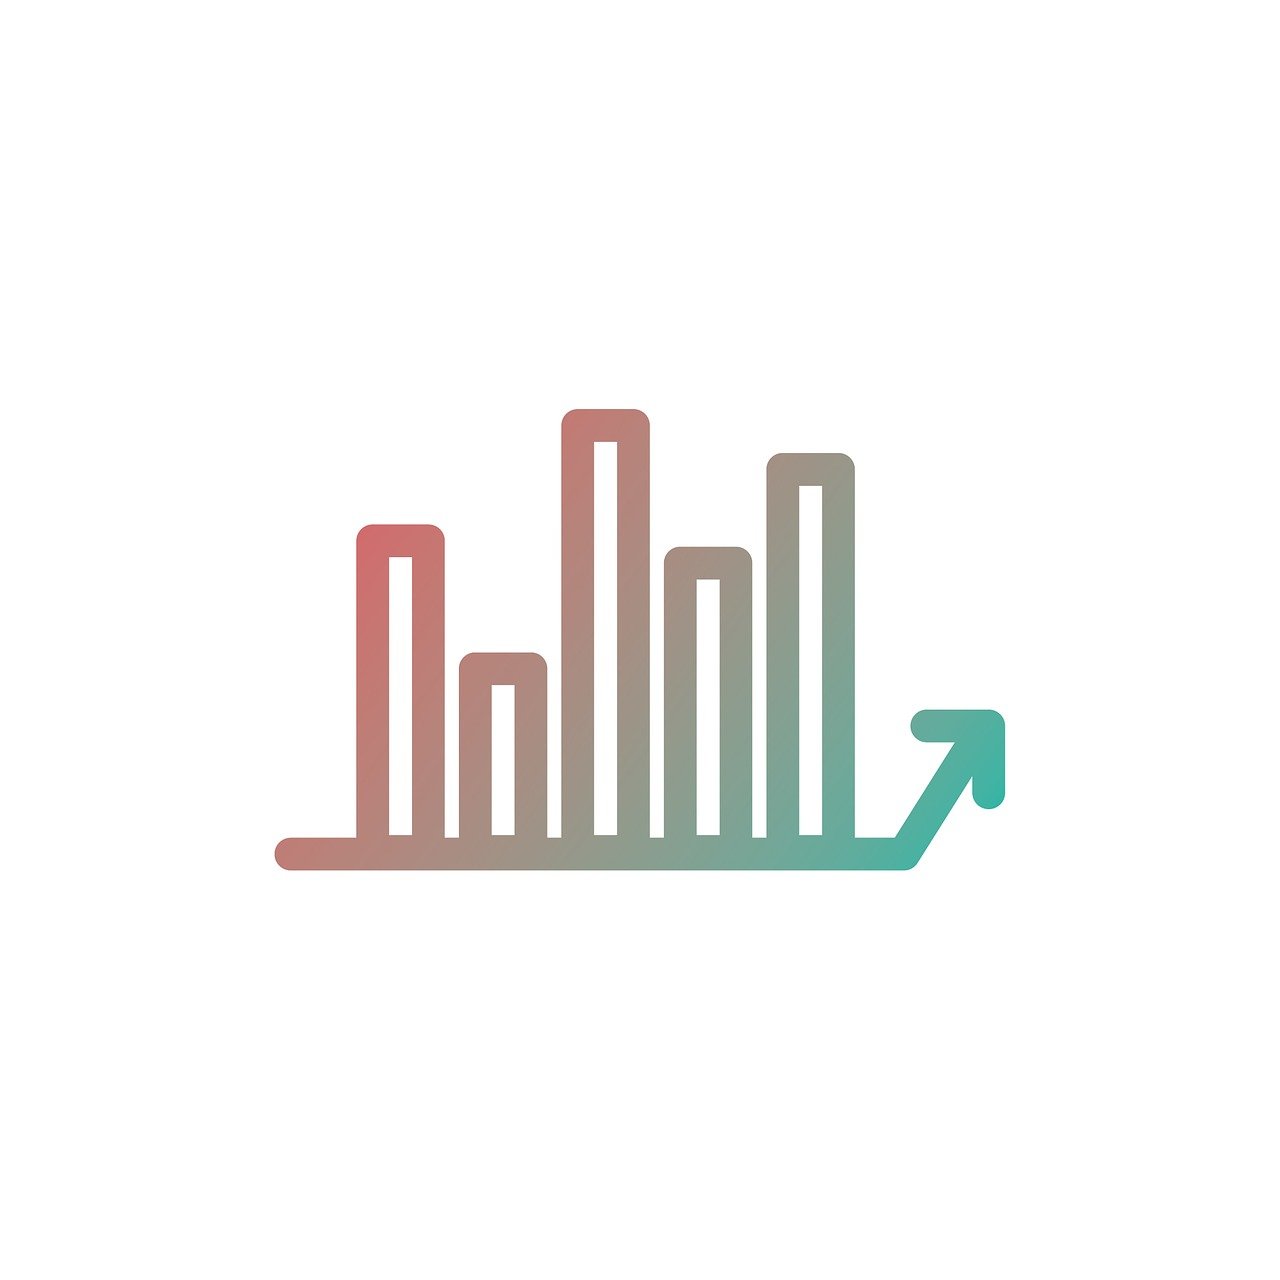 Chart Line Icon Business Graph  - Memed_Nurrohmad / Pixabay